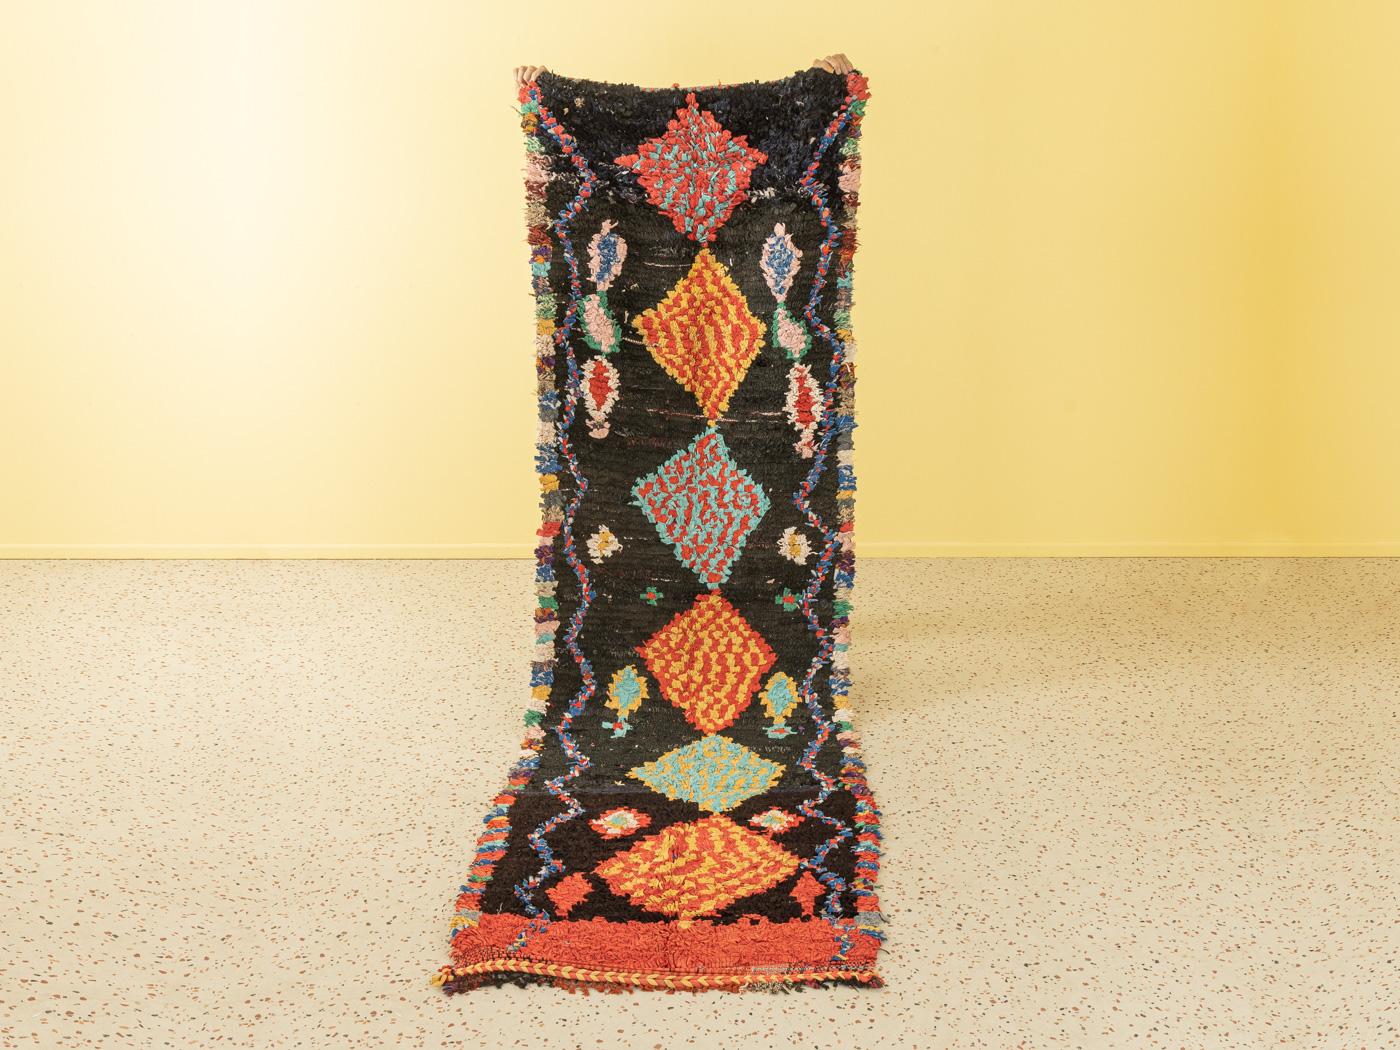 This Boujad is a vintage wool rug with some recycled textile parts – soft and comfortable underfoot. Our Berber rugs are handmade, one knot at a time. Each of our Berber rugs is a long-lasting one-of-a-kind piece, created in a sustainable manner